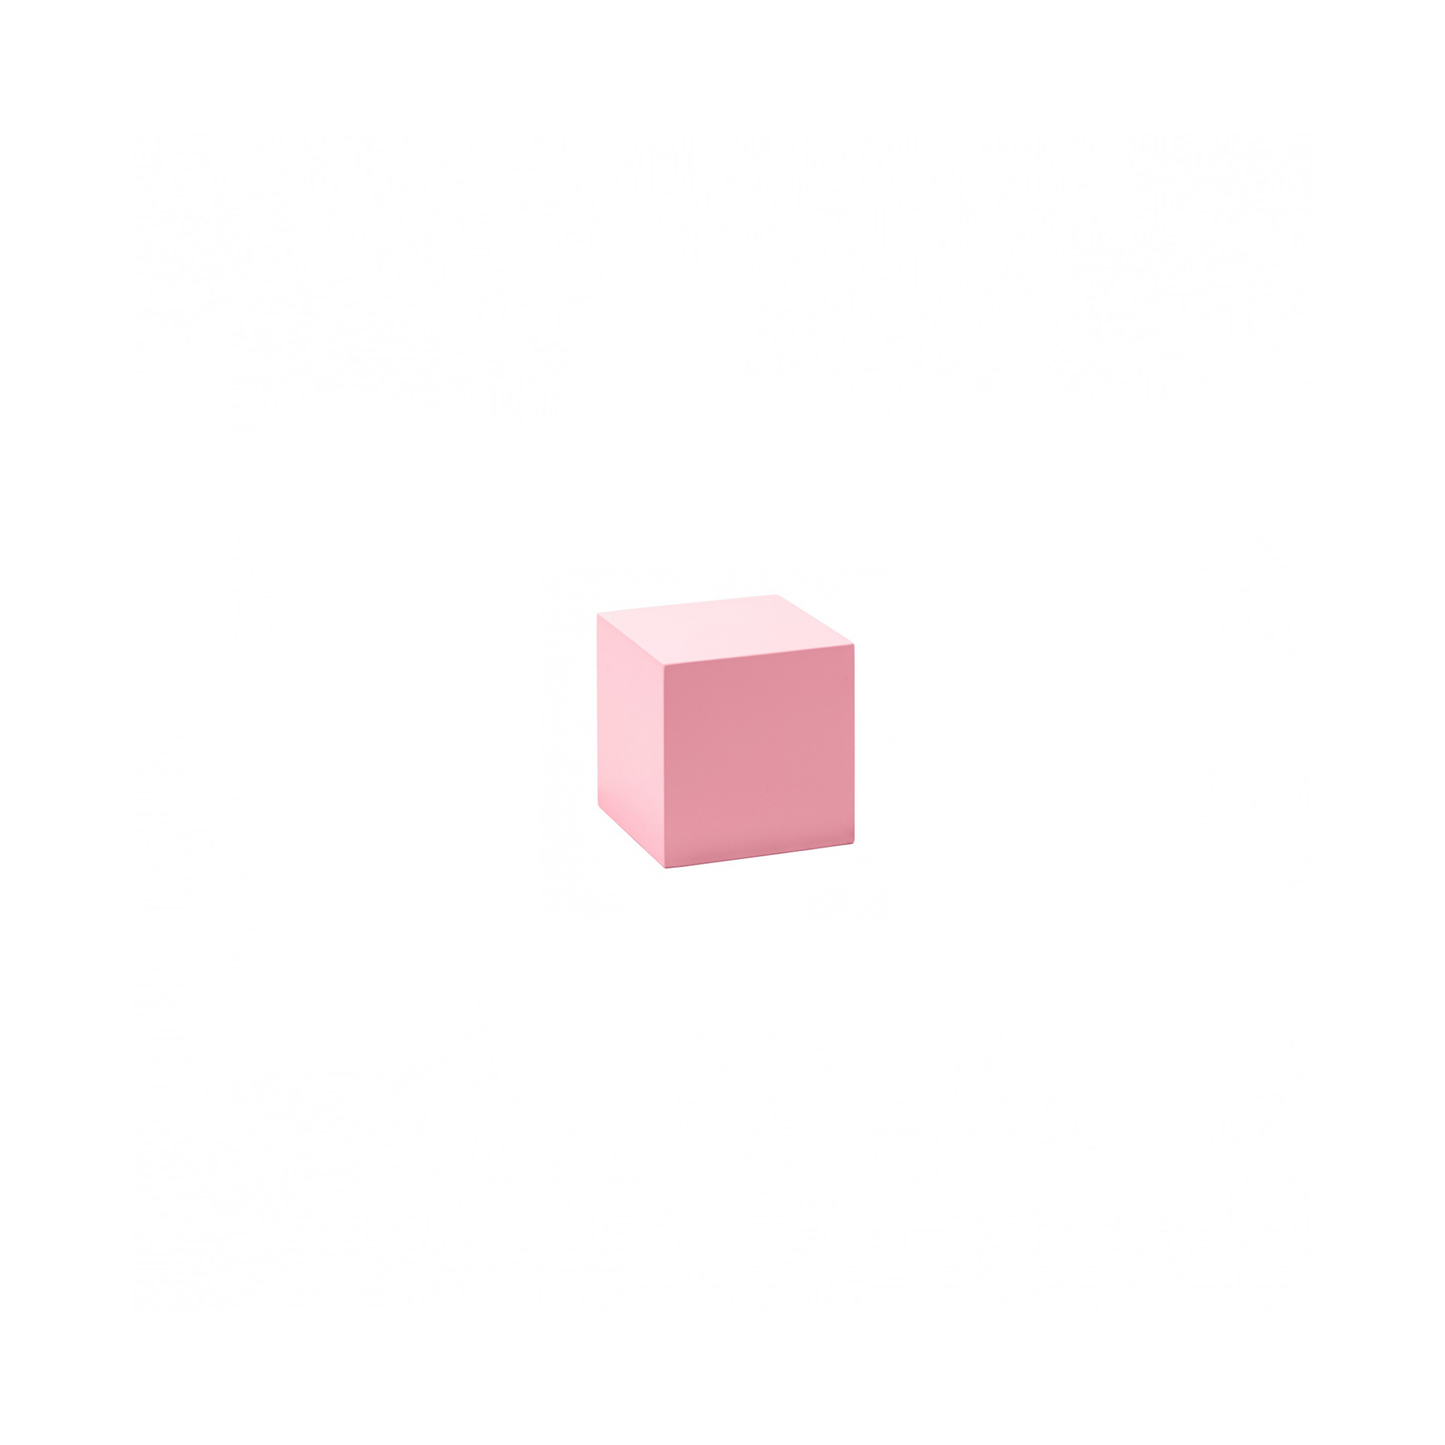 Small pink tower cube 1 x 1 x 1 - GAM AMI